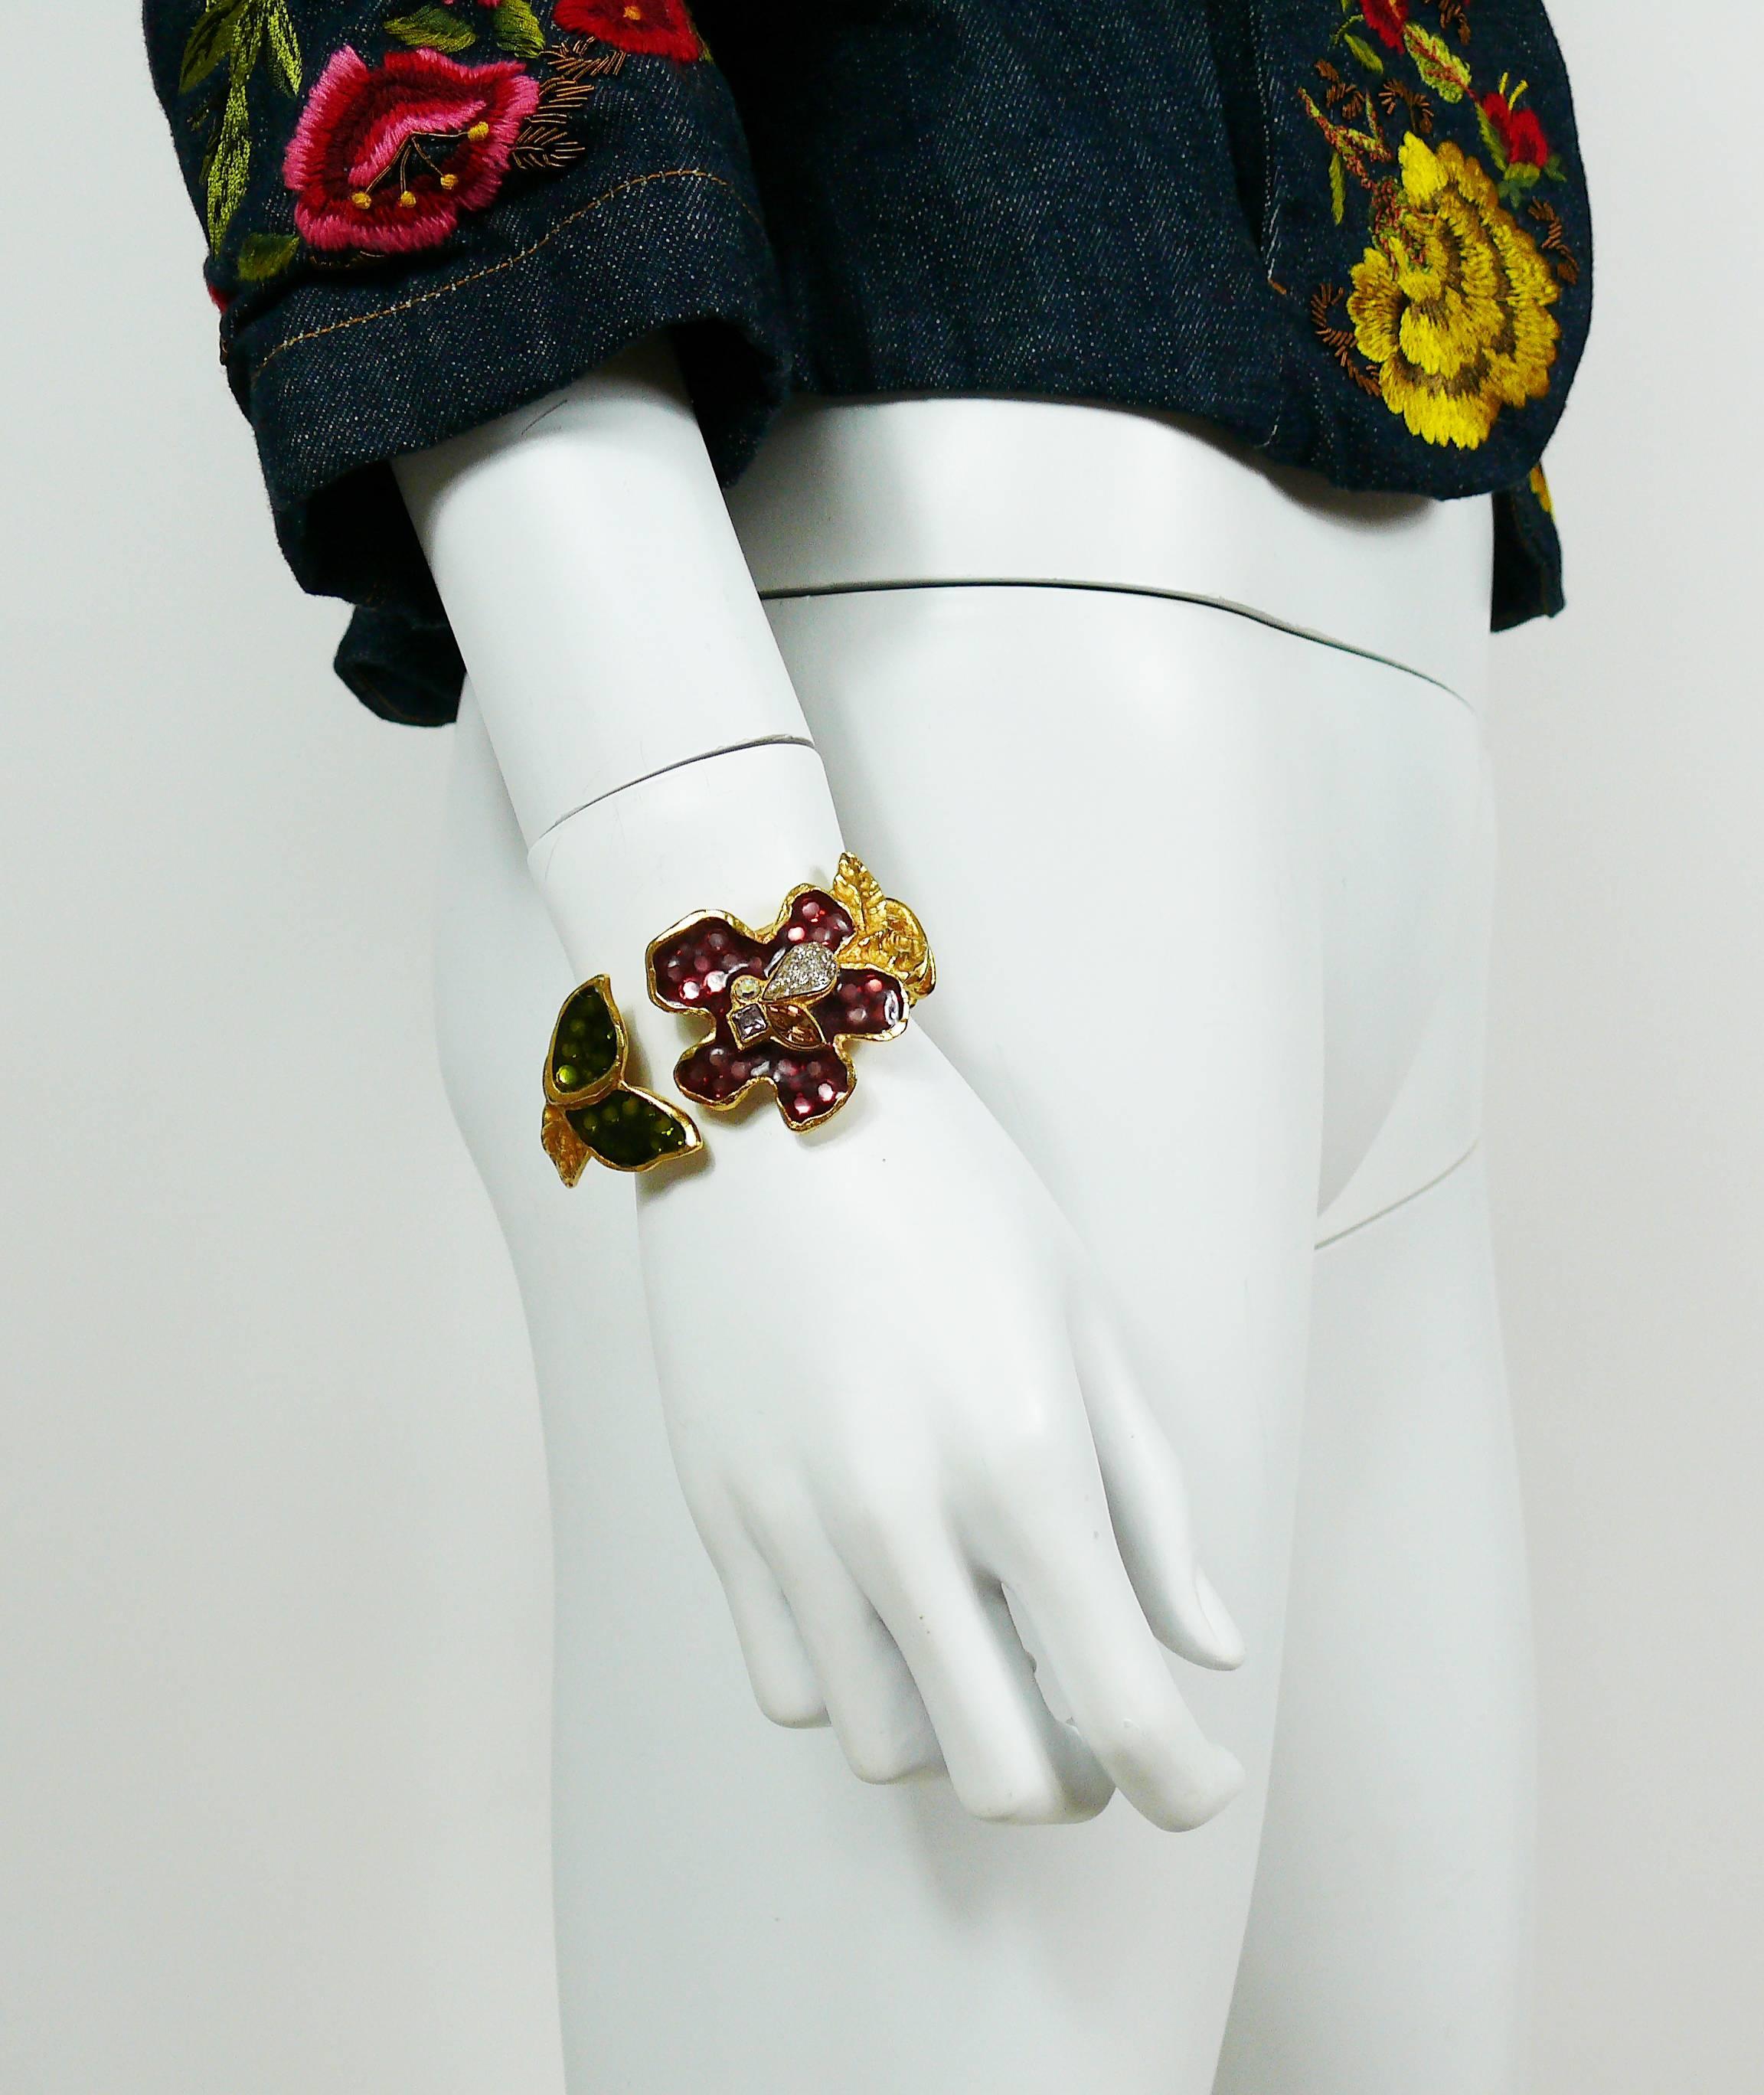 CHRISTIAN LACROIX vintage gold tone clamper bracelet featuring multicolored enamel flowers with crystal embellishement.

Marked CHRISTIAN LACROIX CL Made in France.

Indicative measurements : inner circumference approx. 16.34 cm (6.43 inches) / max.